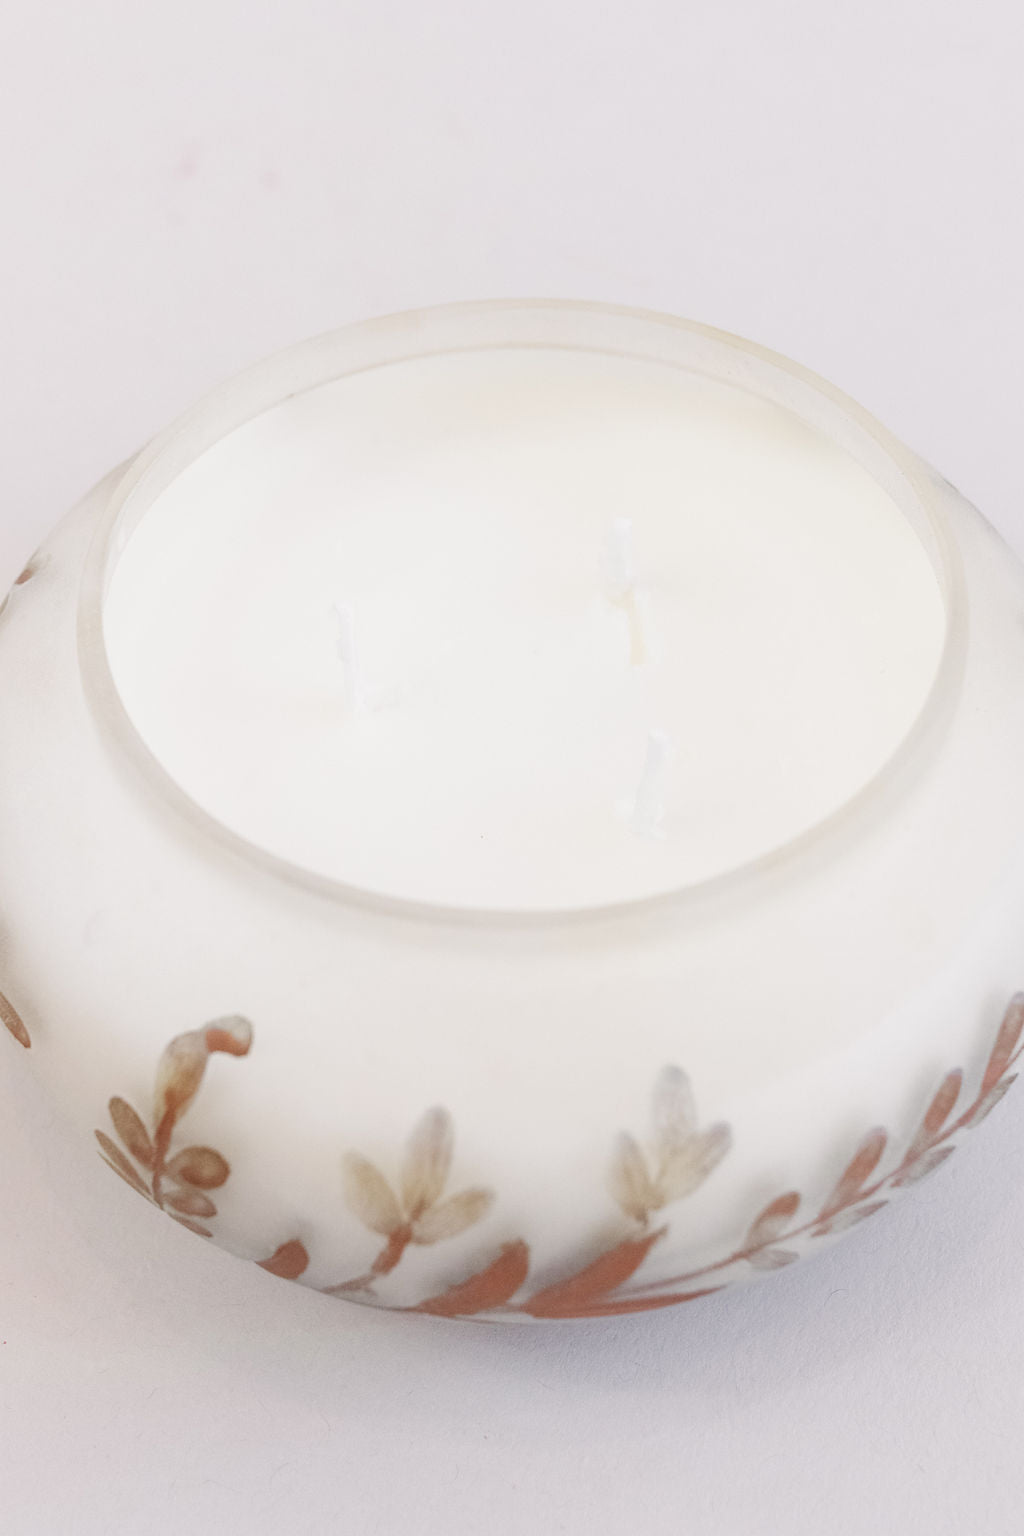 Paddywax | Copper Etched Frosted Cypress and Fir Candle | 14oz - Poppy and Stella